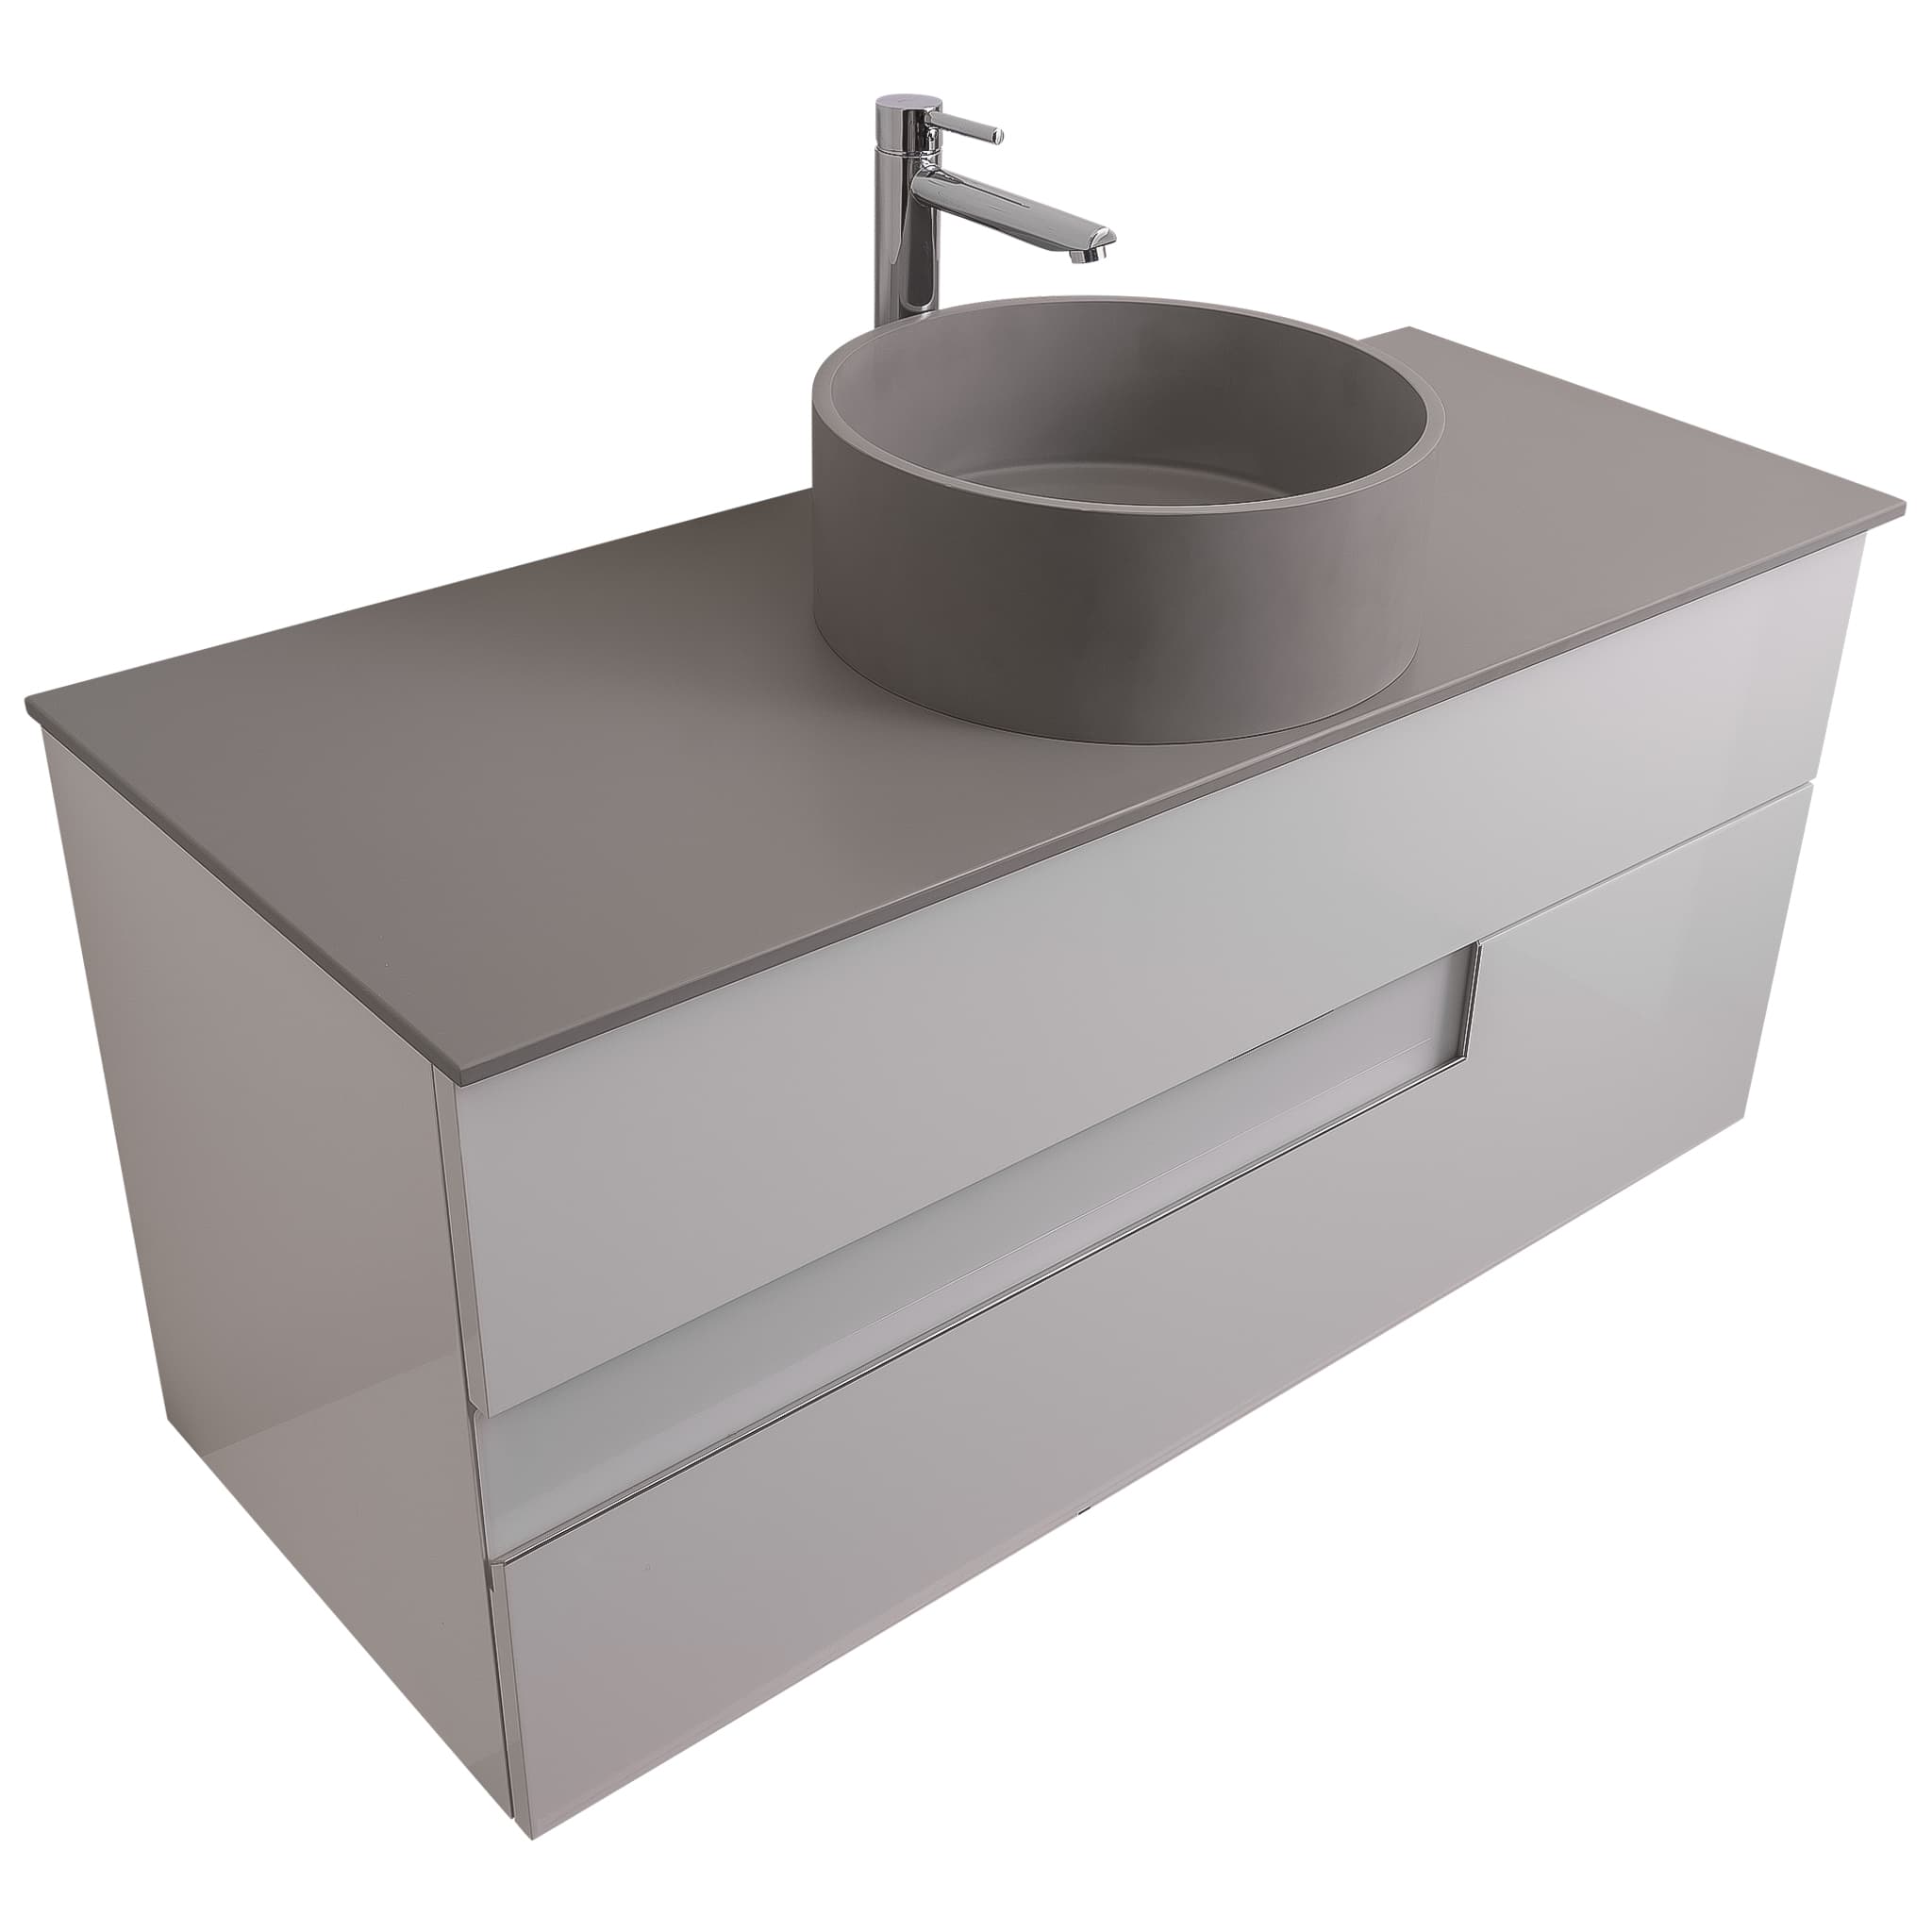 Vision 47.5 White High Gloss Cabinet, Solid Surface Flat Grey Counter And Round Solid Surface Grey Basin 1386, Wall Mounted Modern Vanity Set